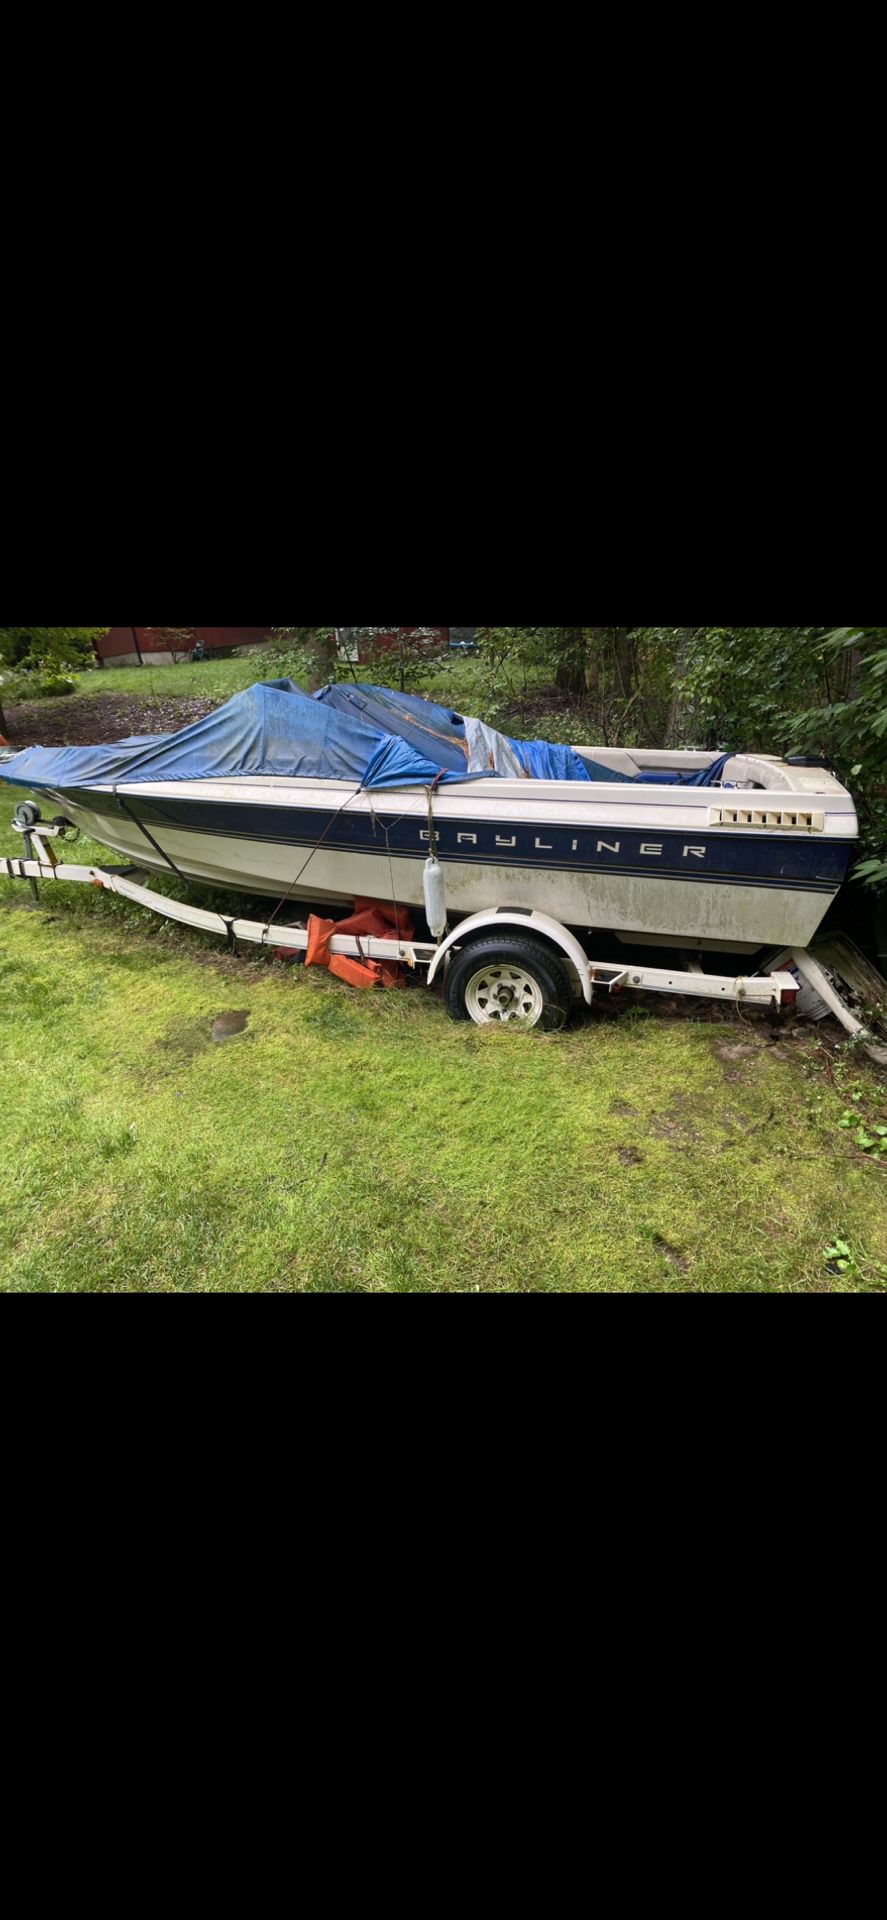 Project Boat